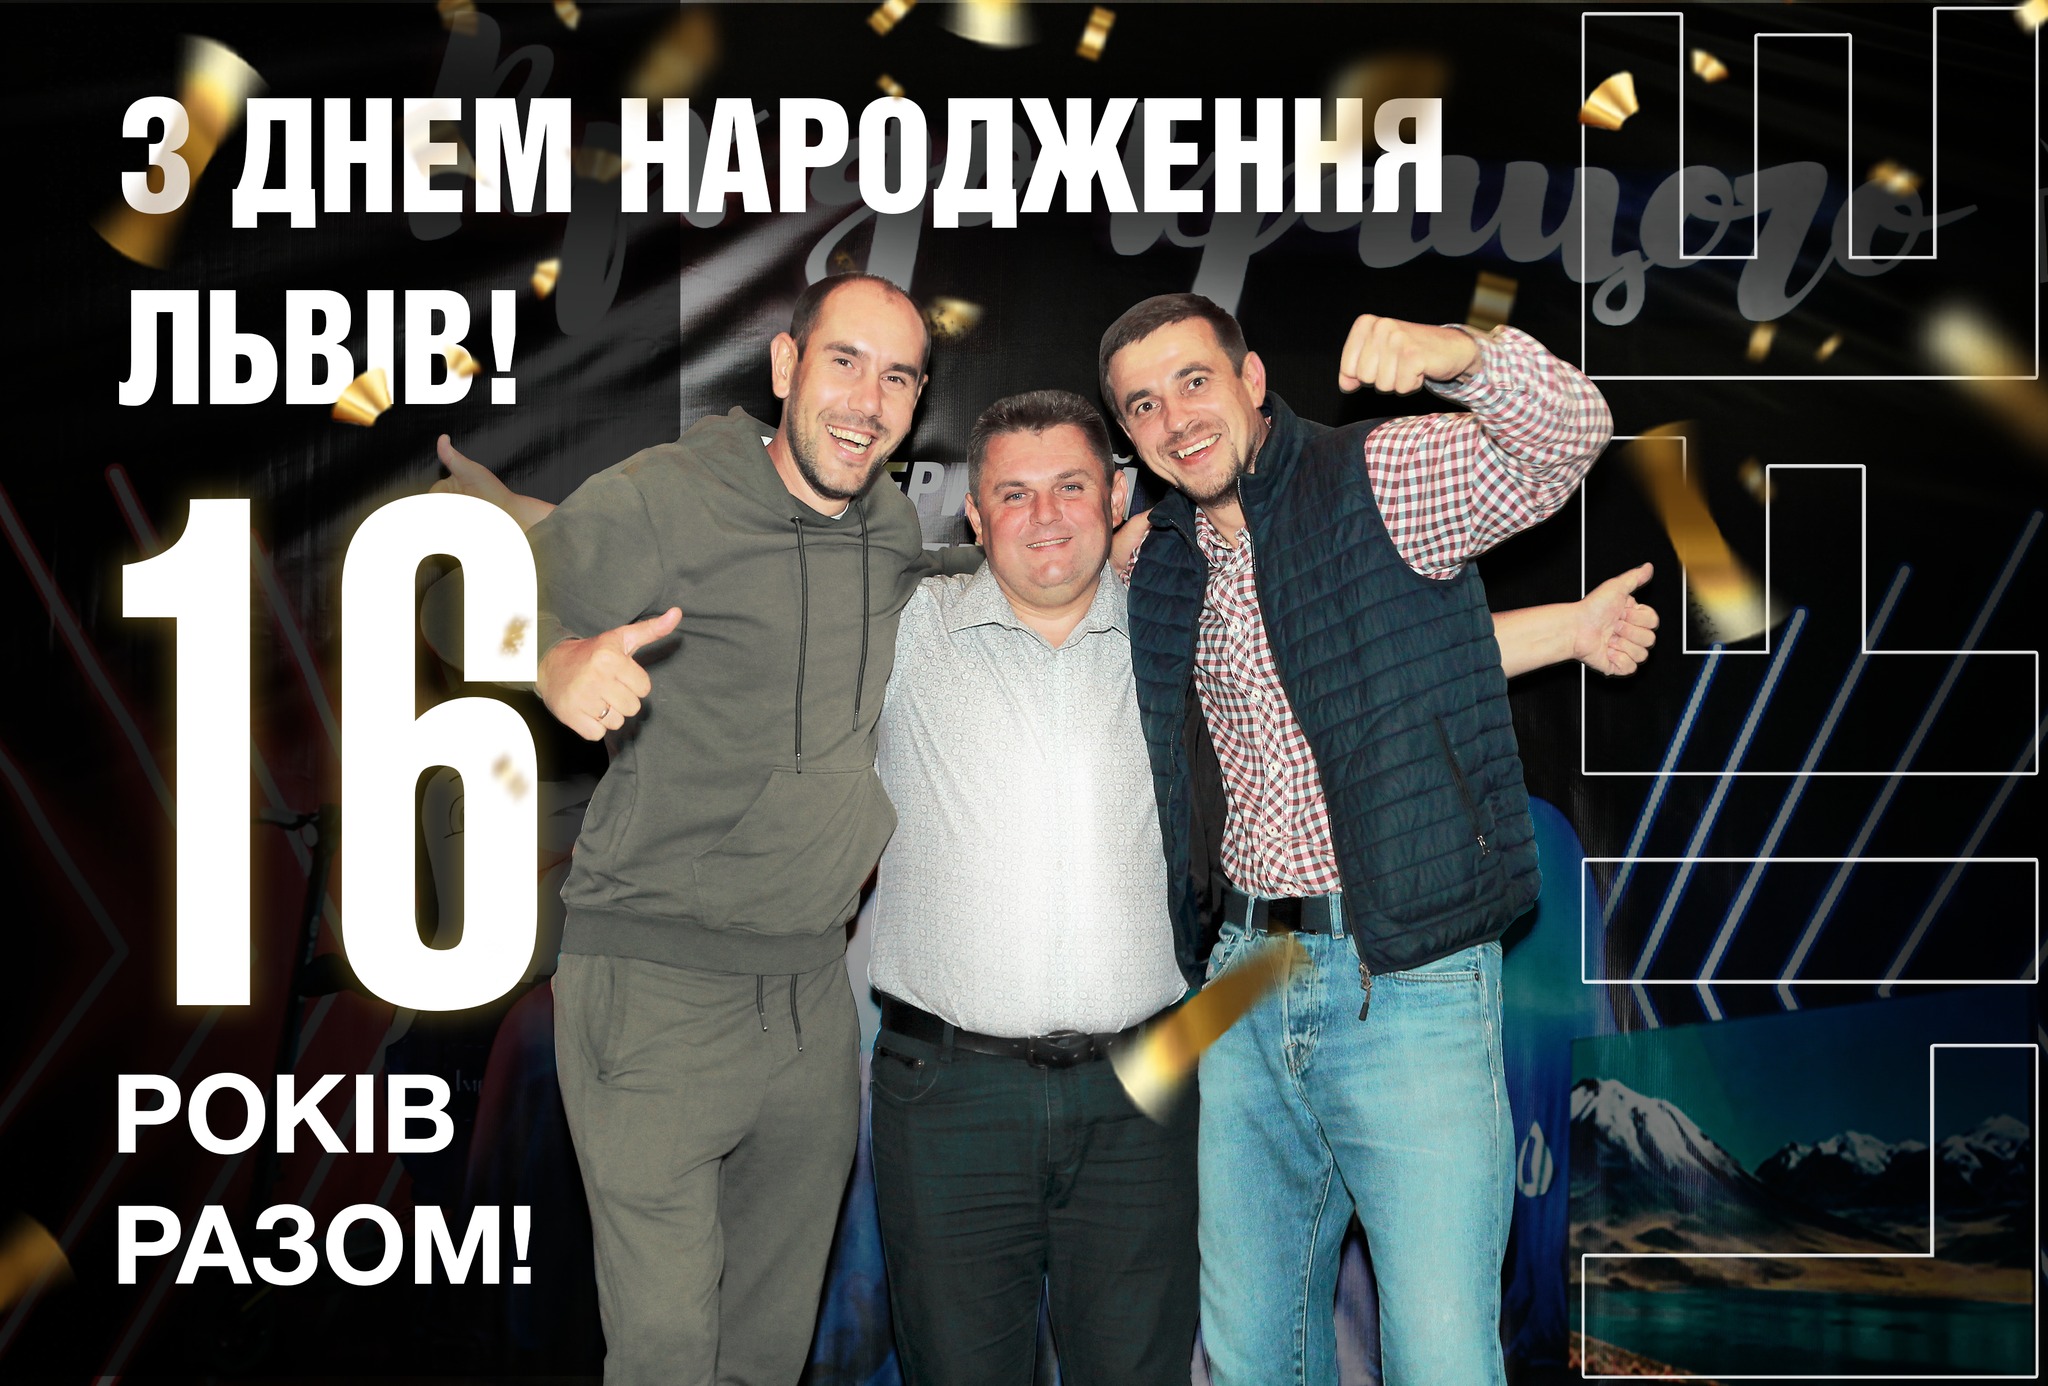 Happy Anniversary to our Lviv branch office